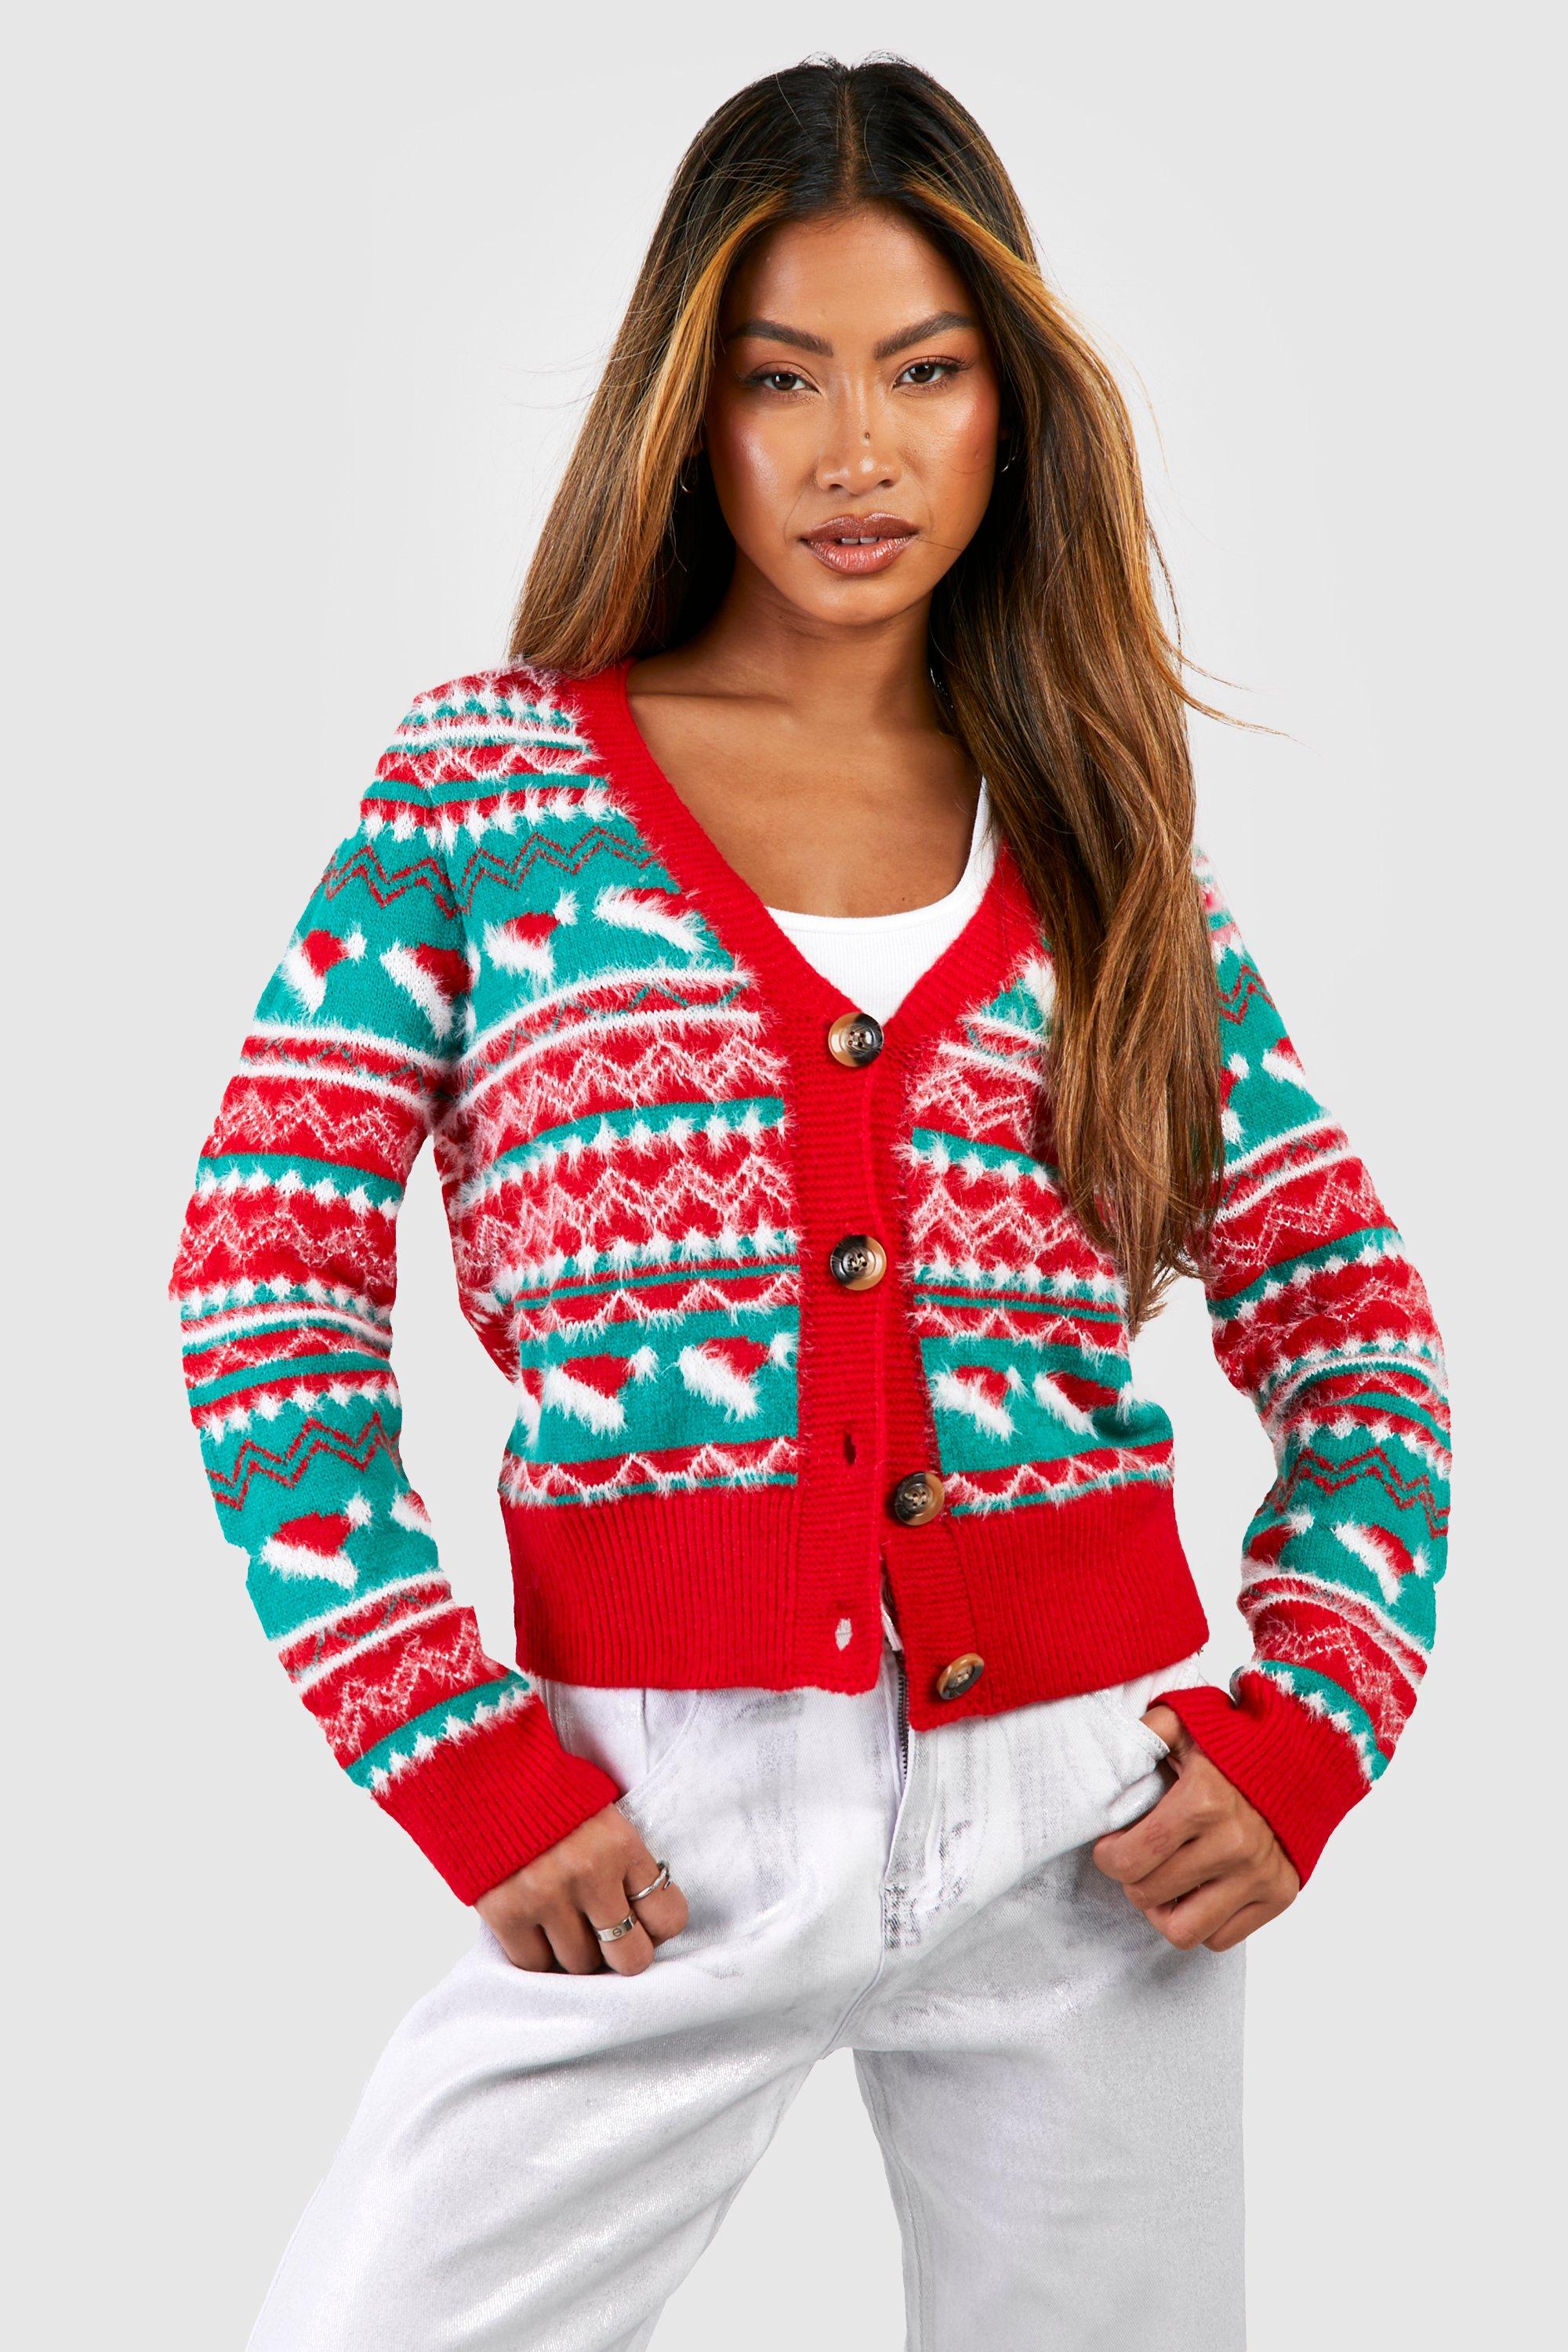 1950s Sweaters, 50s Cardigans, 50s Jumpers Womens Soft Knit Fairisle Christmas Cardigan - Red - M $35.00 AT vintagedancer.com